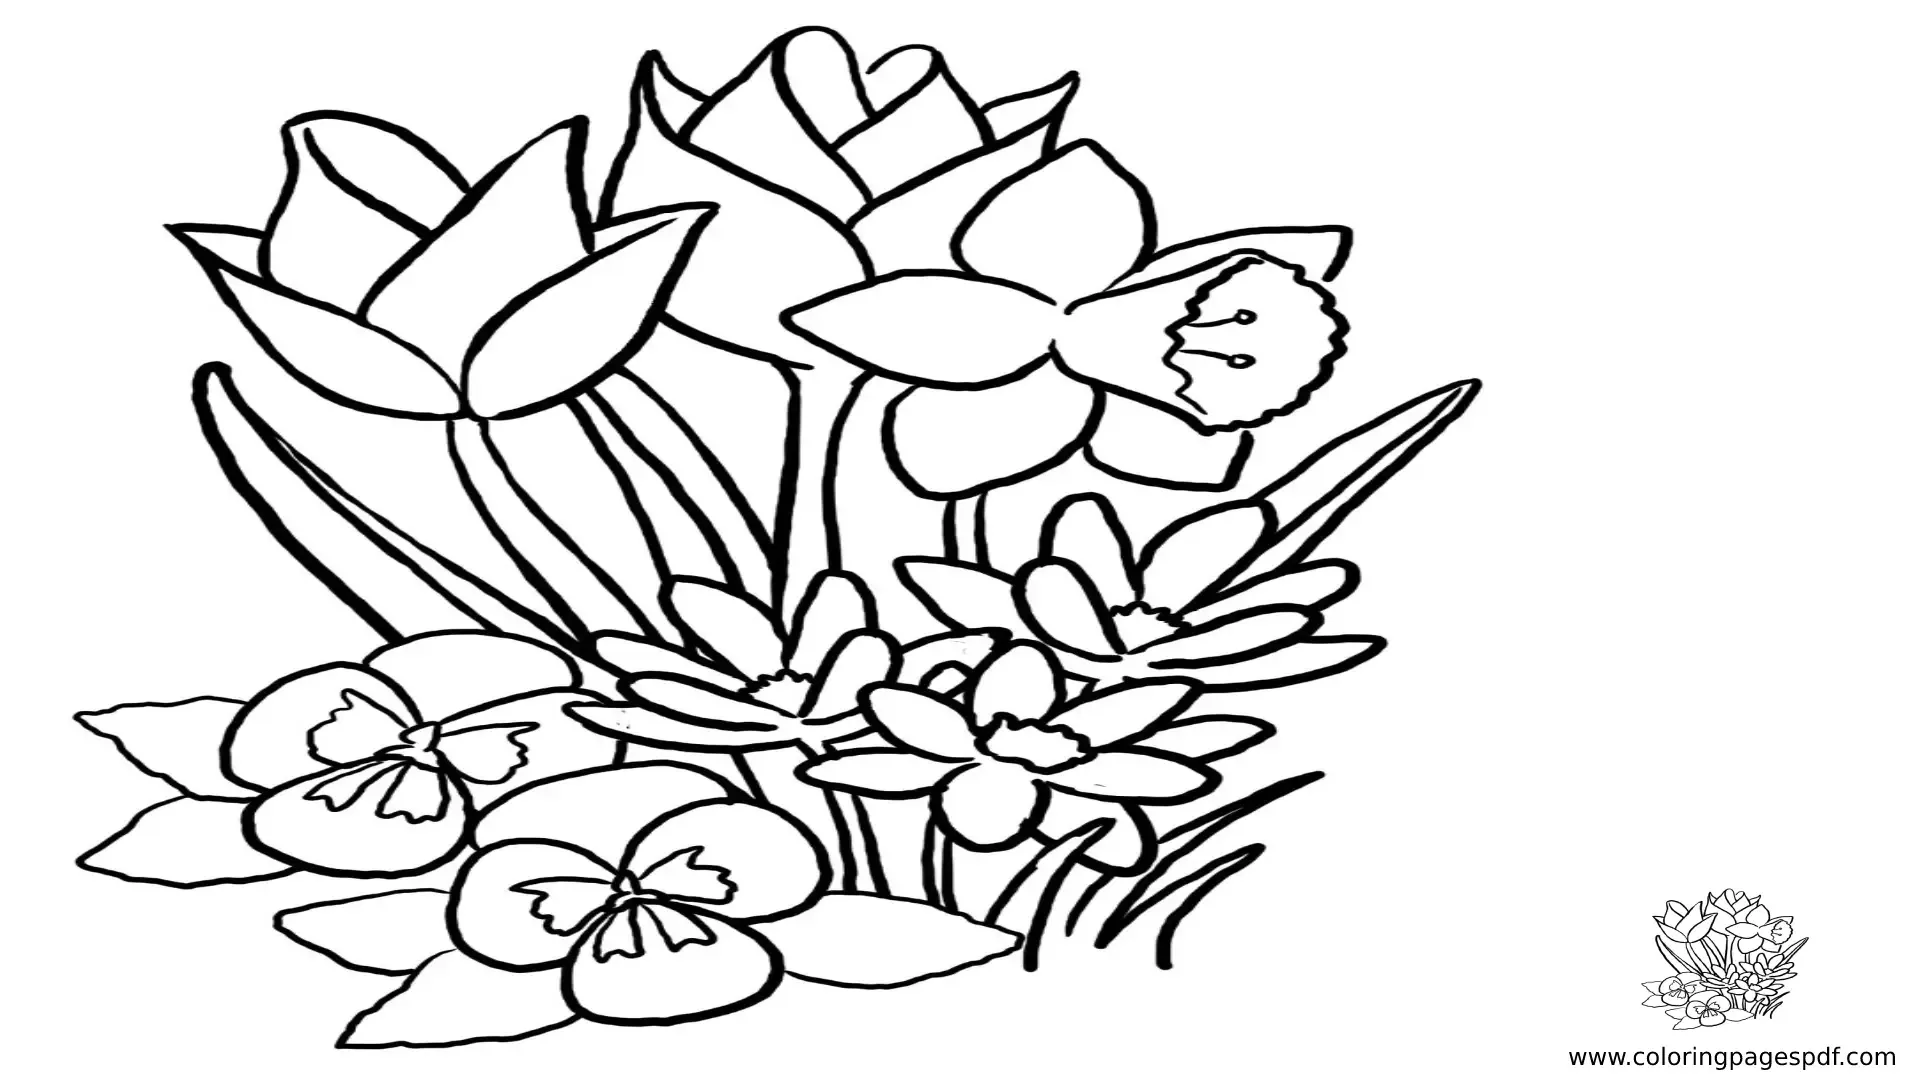 Coloring Pages Of Amazing Spring Flowers